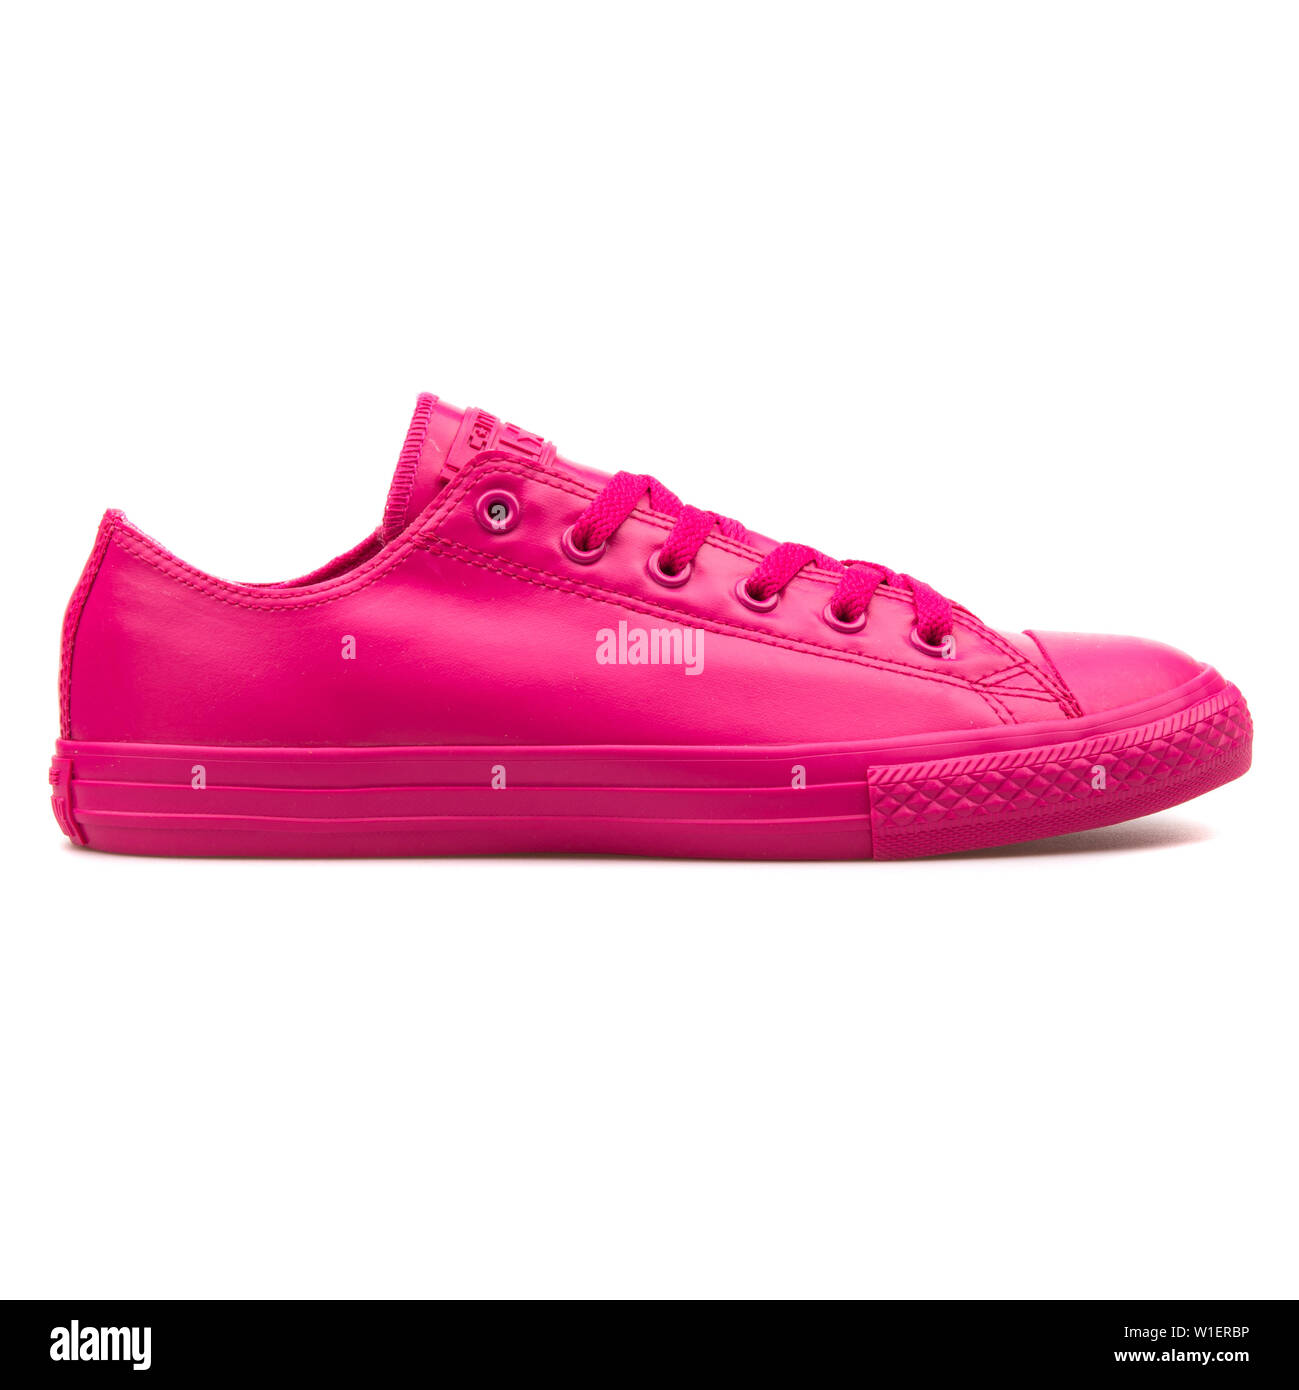 VIENNA, AUSTRIA - AUGUST 10, 2017: Converse Chuck Taylor All Star Rubber OX  cosmos pink sneaker on white background Stock Photo - Alamy